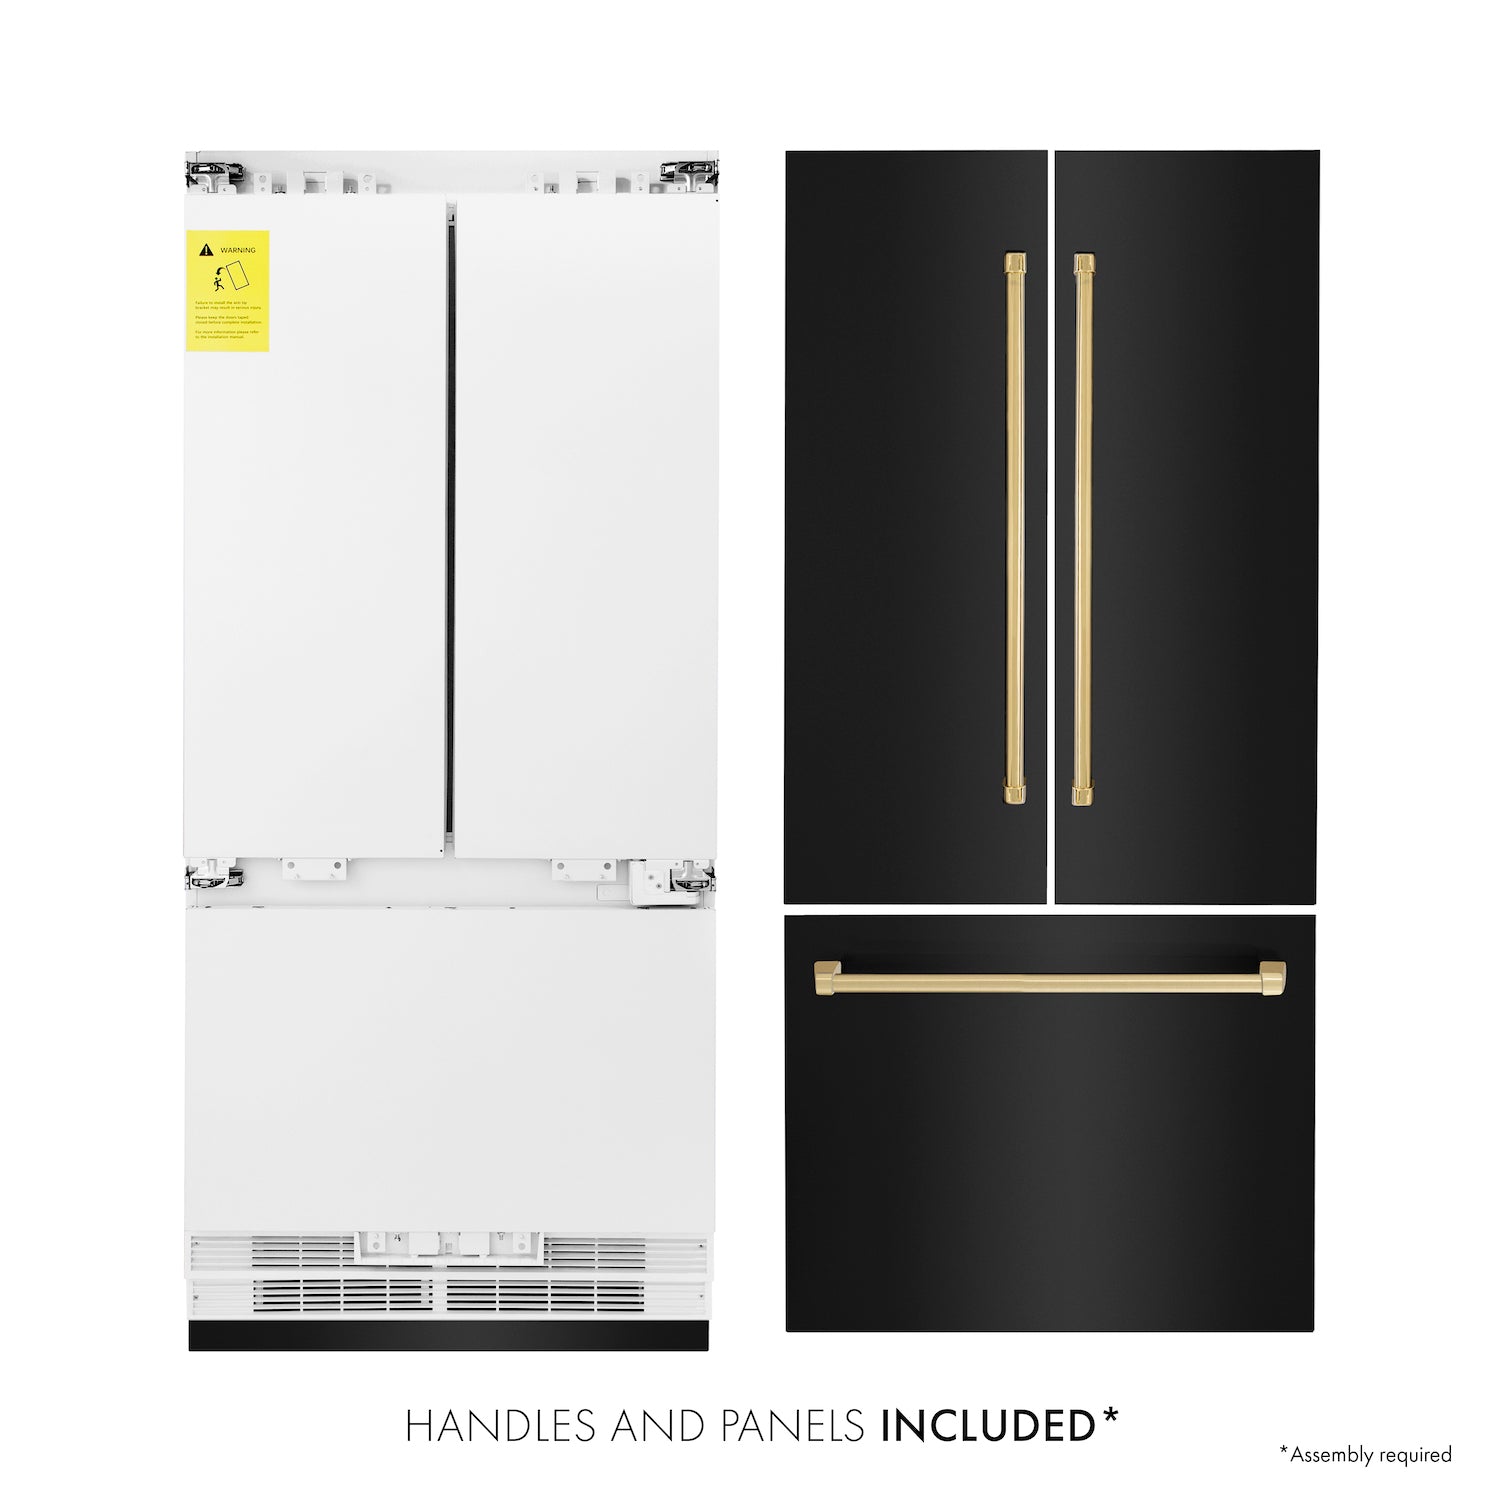 Includes black stainless steel panels and polished gold handles.